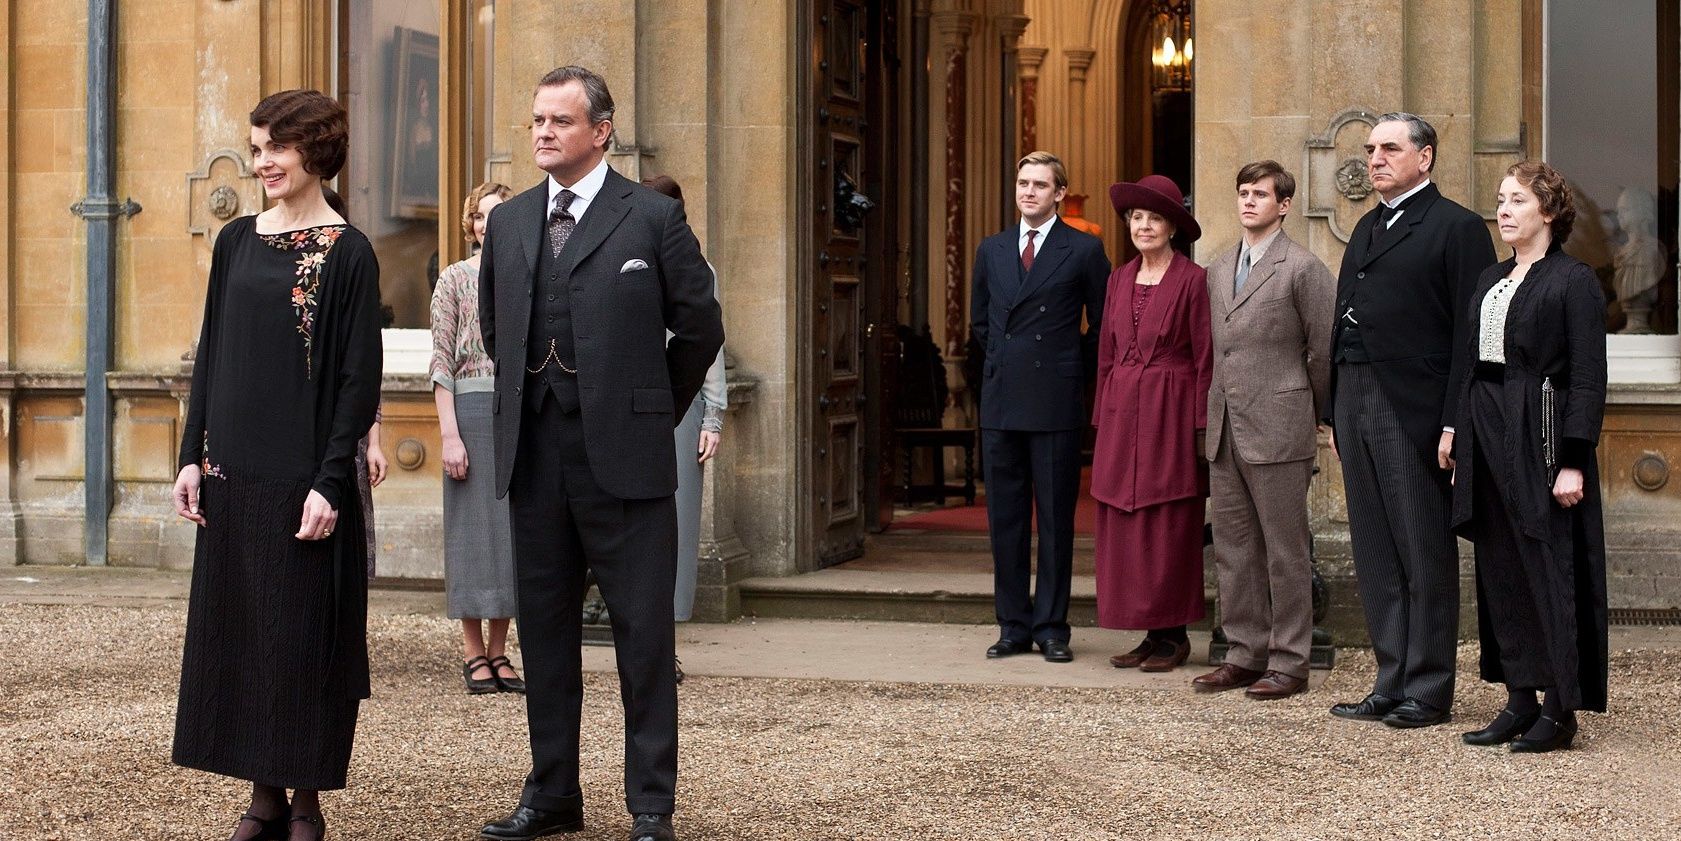 Downton Abbey: 6 Things That Were Historically Accurate About The Costumes  (& 4 That Weren't)